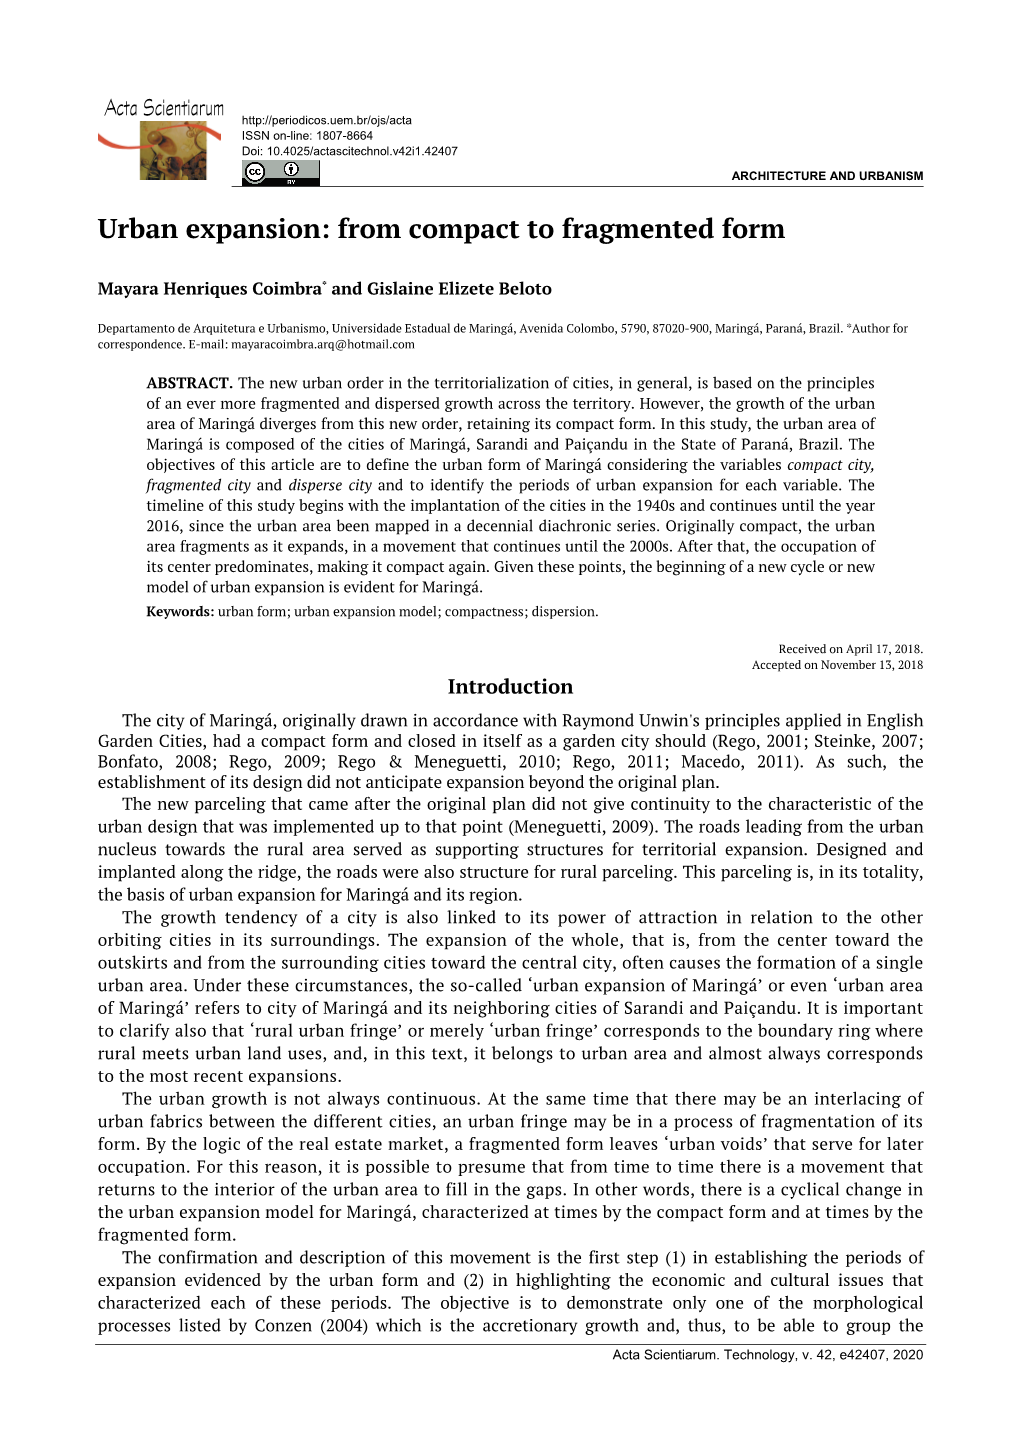 Urban Expansion: from Compact to Fragmented Form